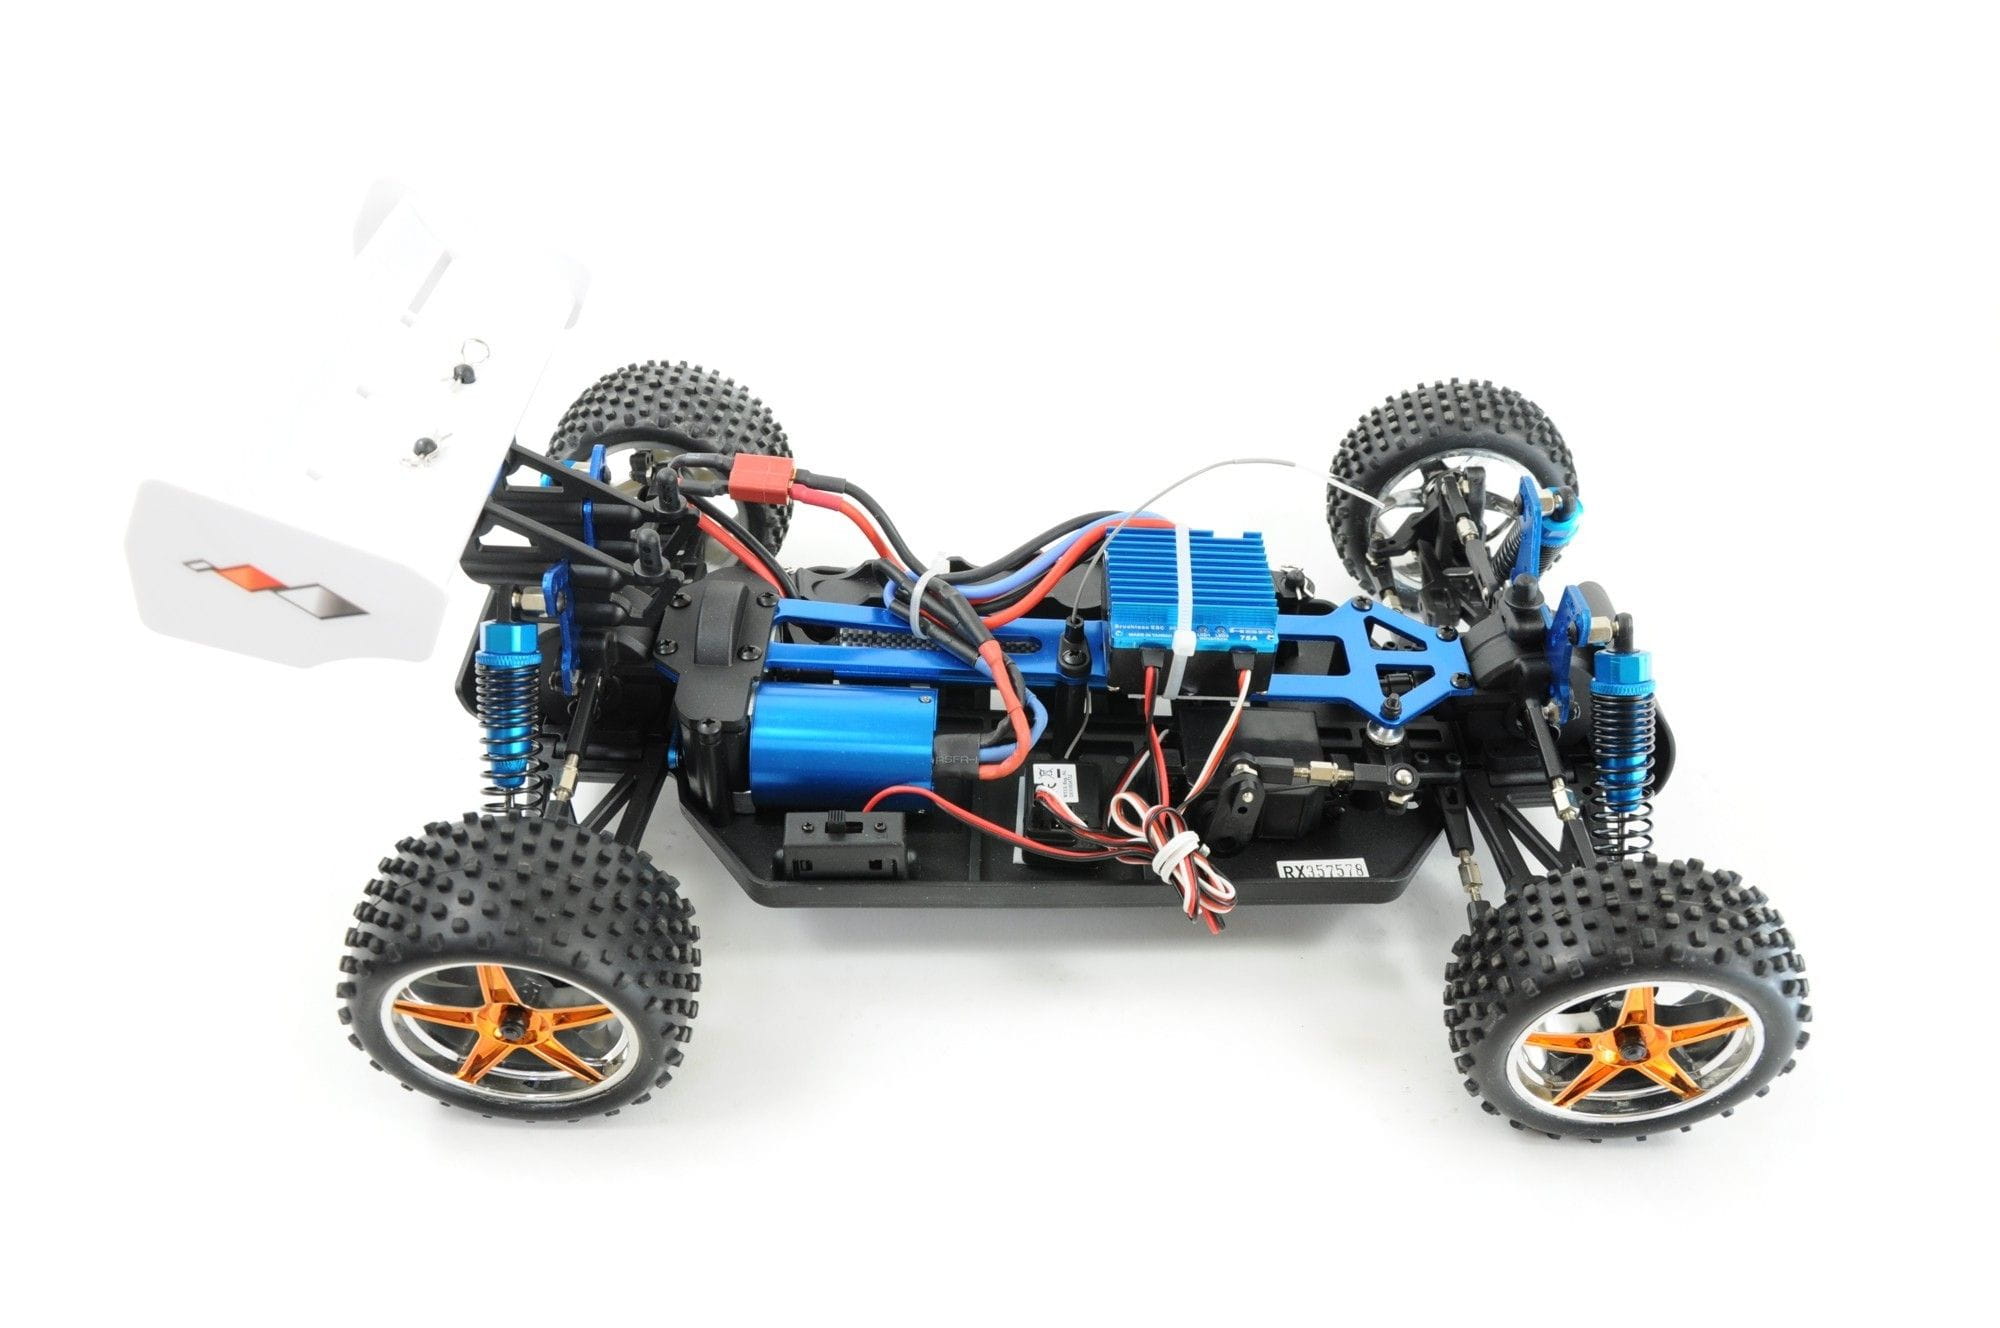 Amewi Elektro Buggy Booster pro Brushless 1:10 4WD 2,4Ghz RTR